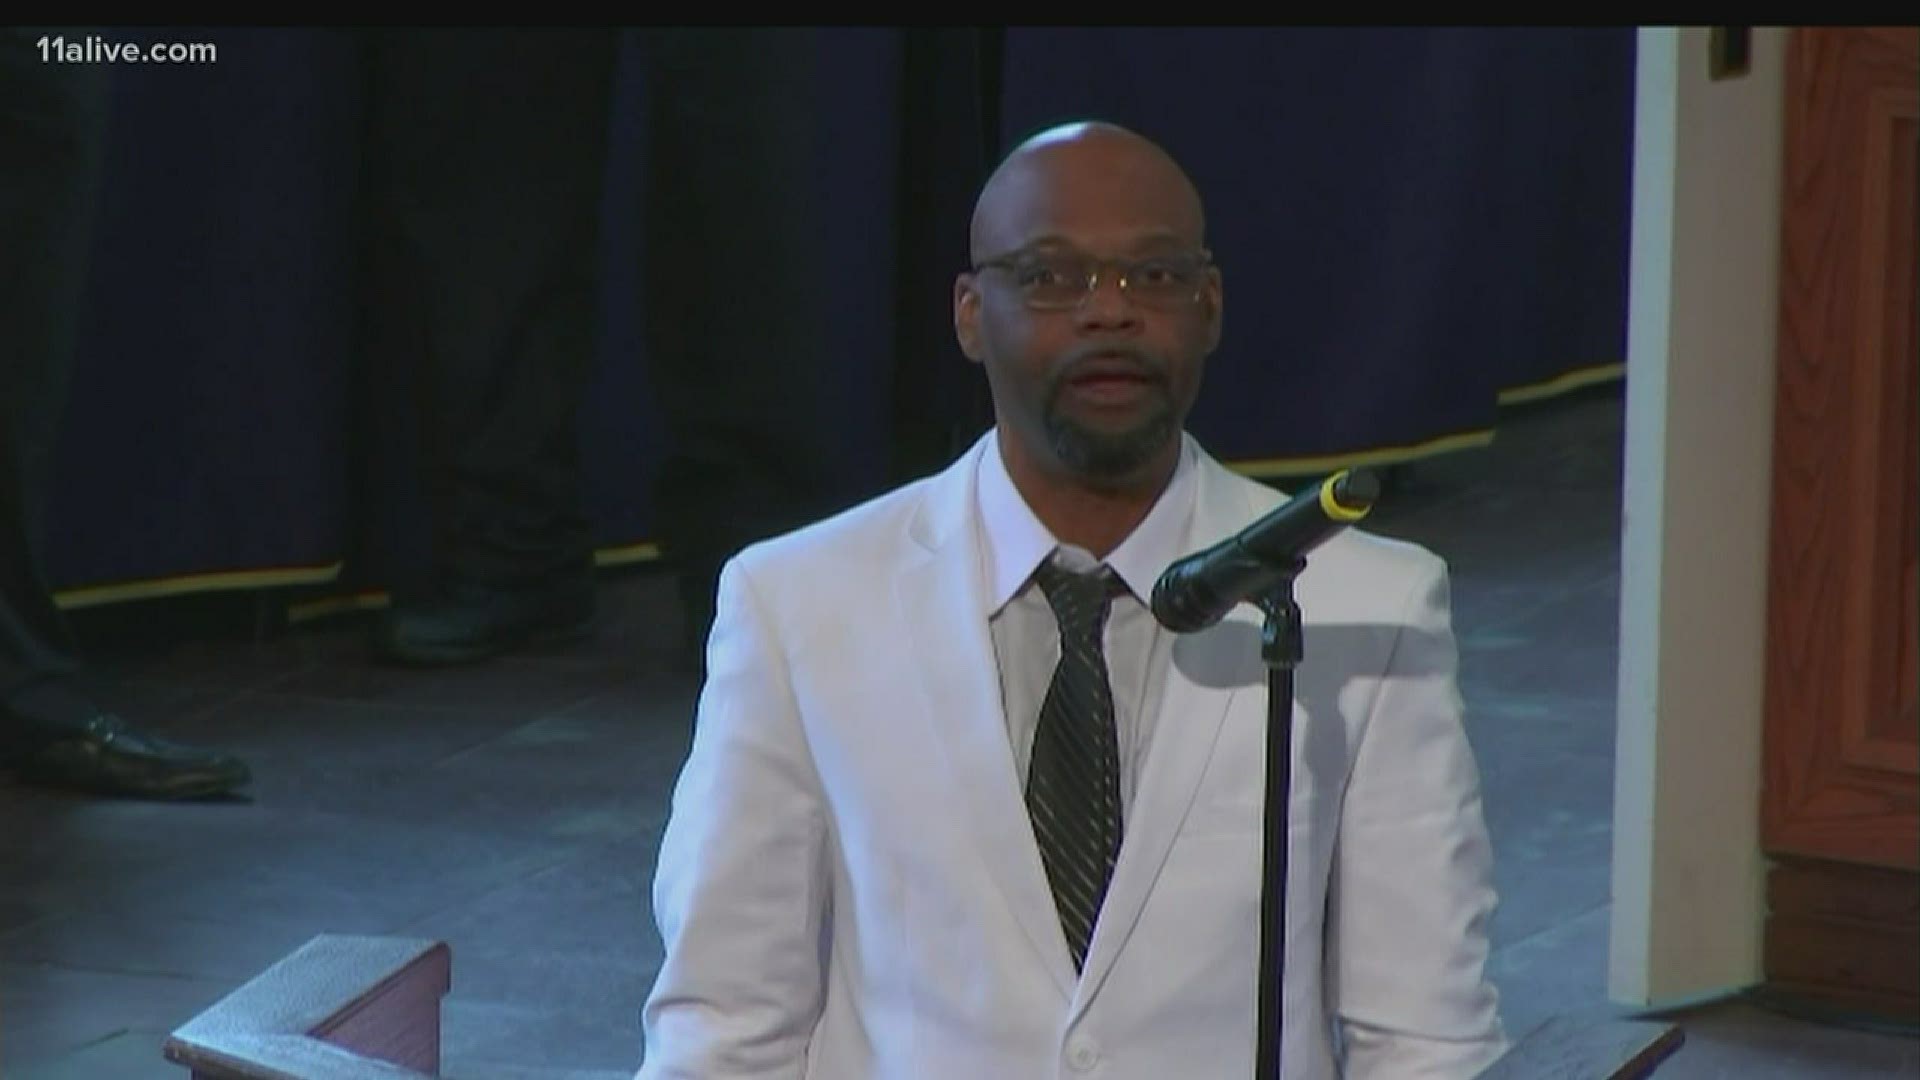 The cousin of Rayshard Brooks, Jymaco Brooks, delivers remarks during Brooks' funeral in Atlanta.